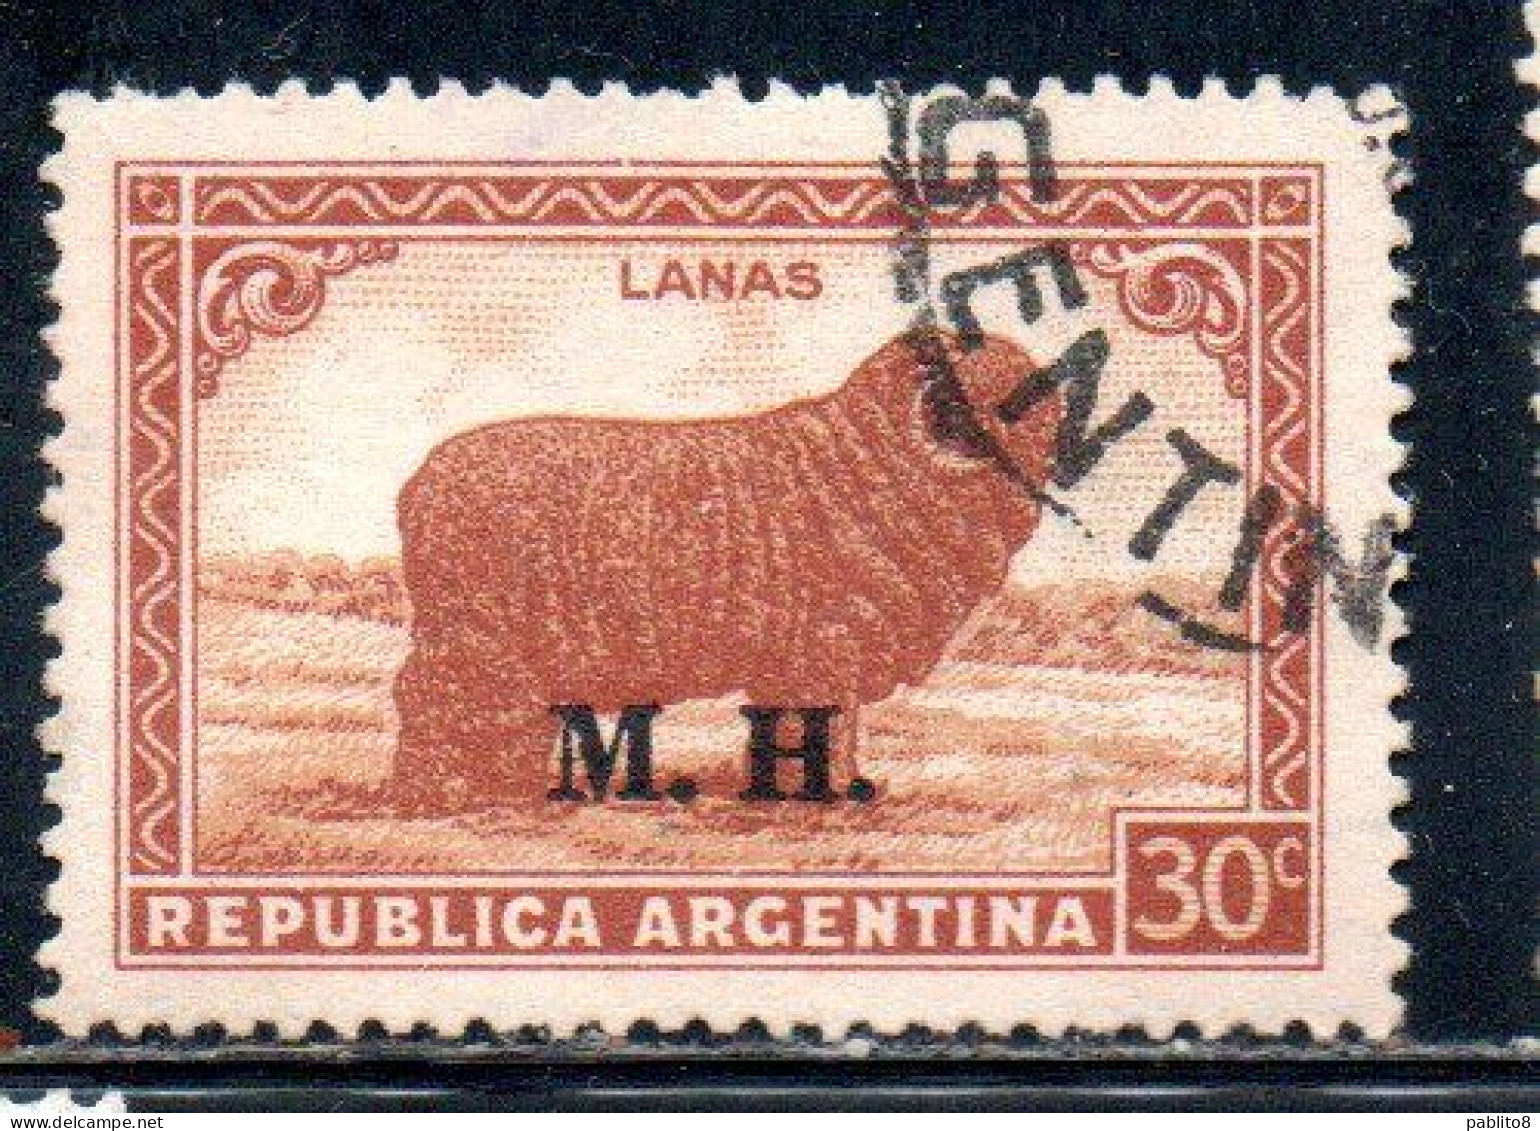 ARGENTINA 1935 1937 OFFICIAL DEPARTMENT STAMP OVERPRINTED M.H. MINISTRY OF FINANCE MH 30c USED USADO - Servizio